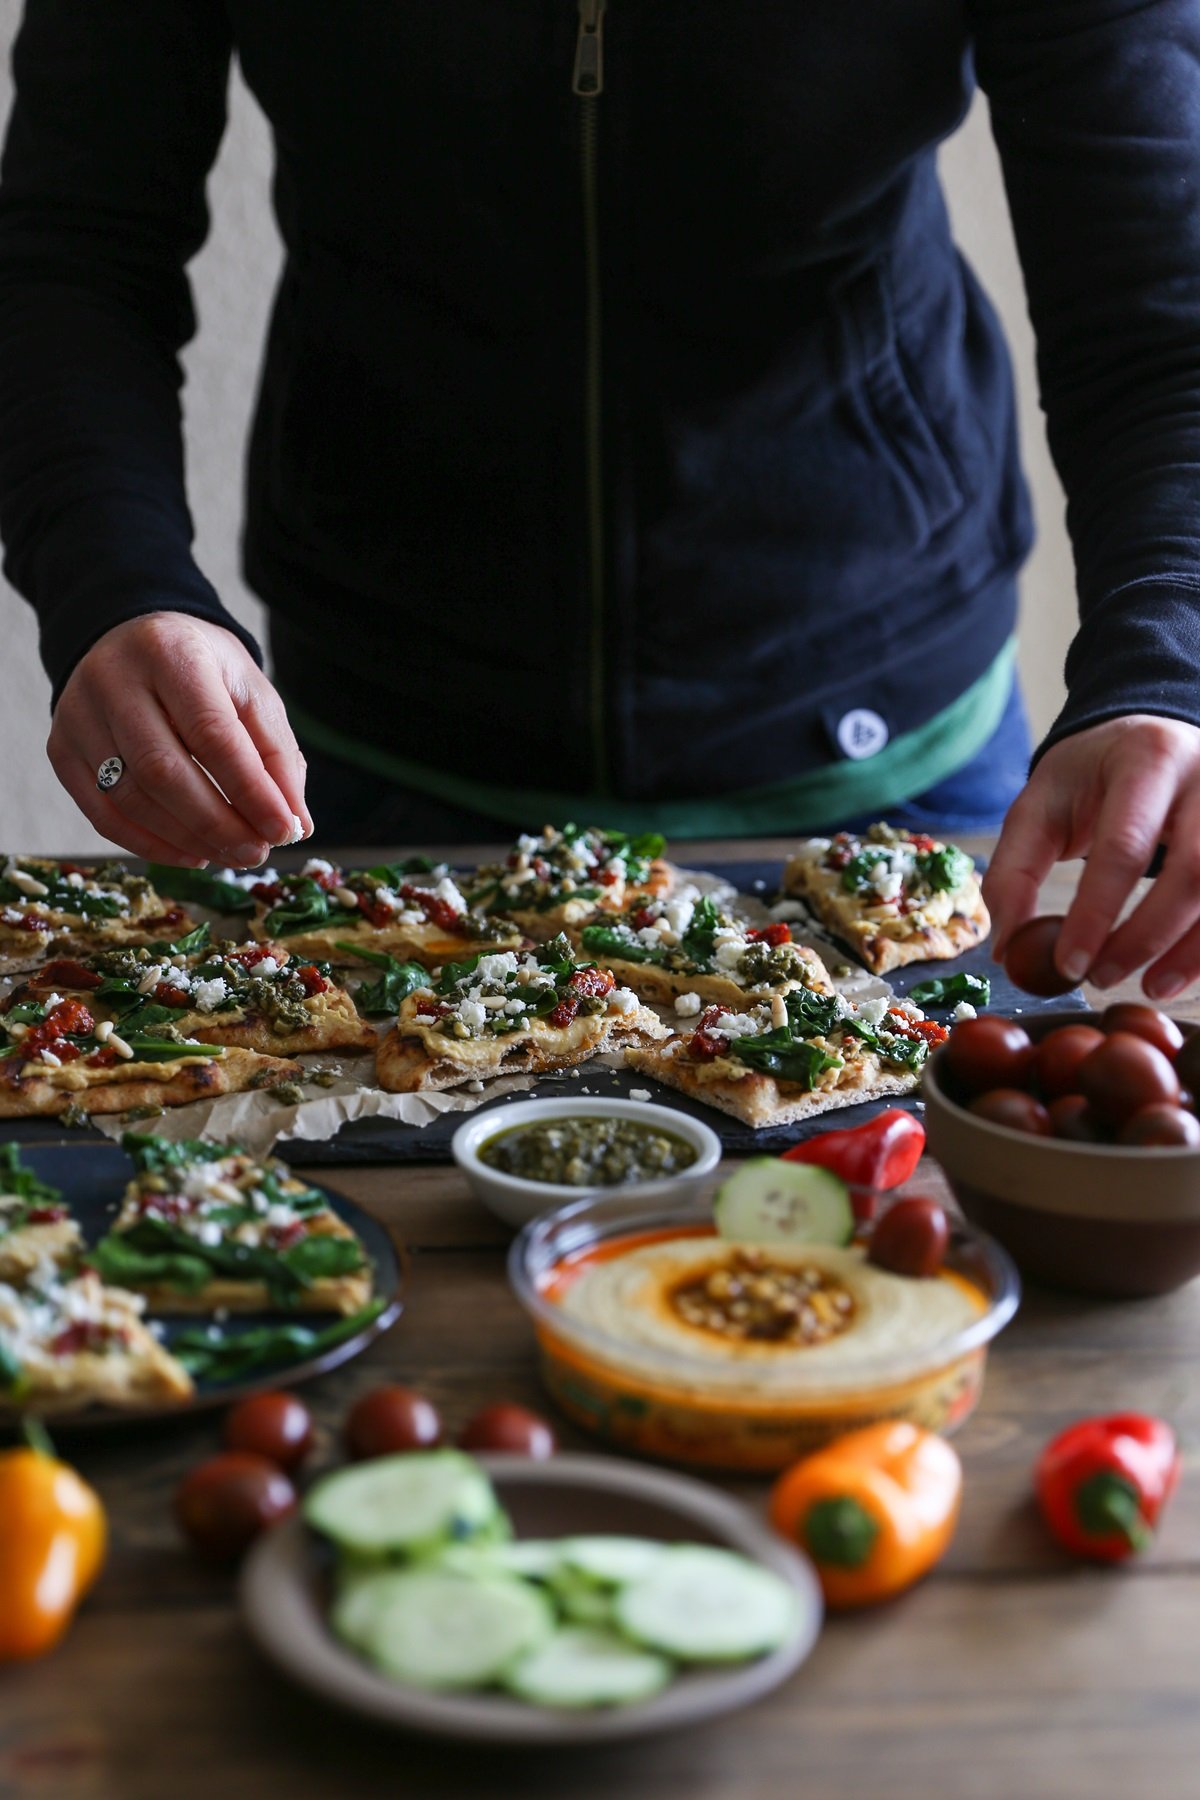 Woman topping hummus flatbread with toppings like tomatoes.